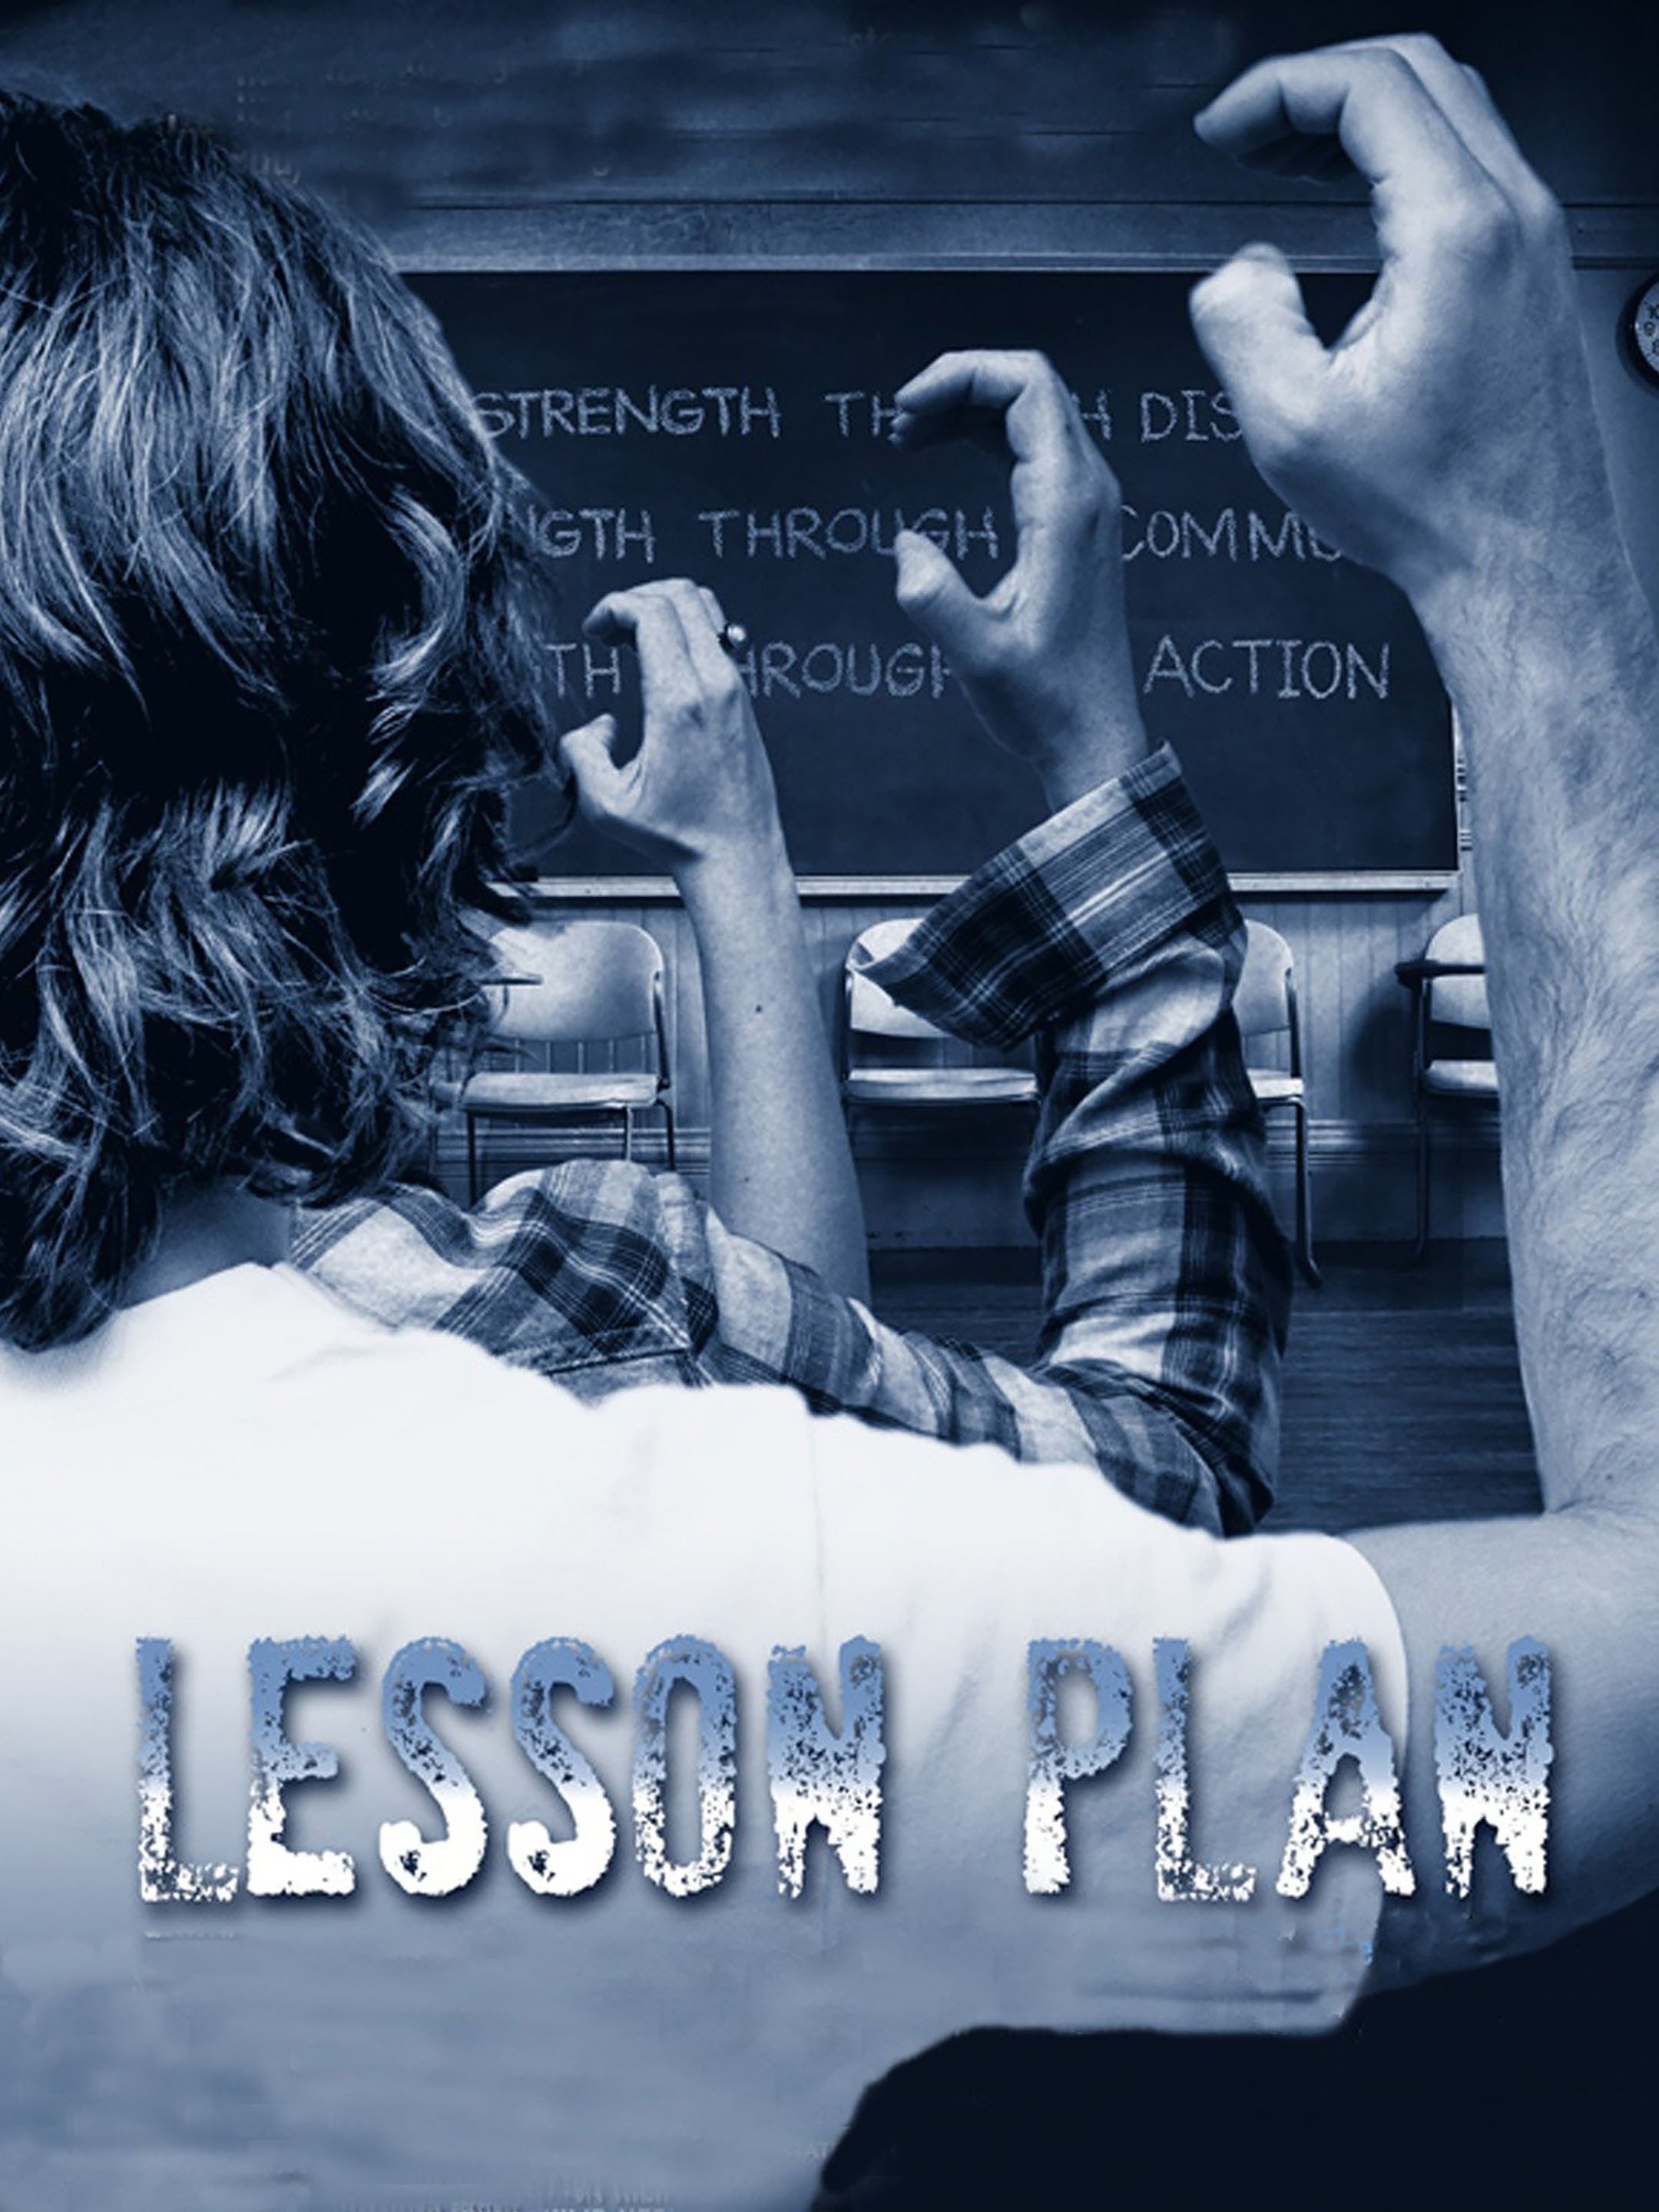 lesson plan movie review rotten tomatoes